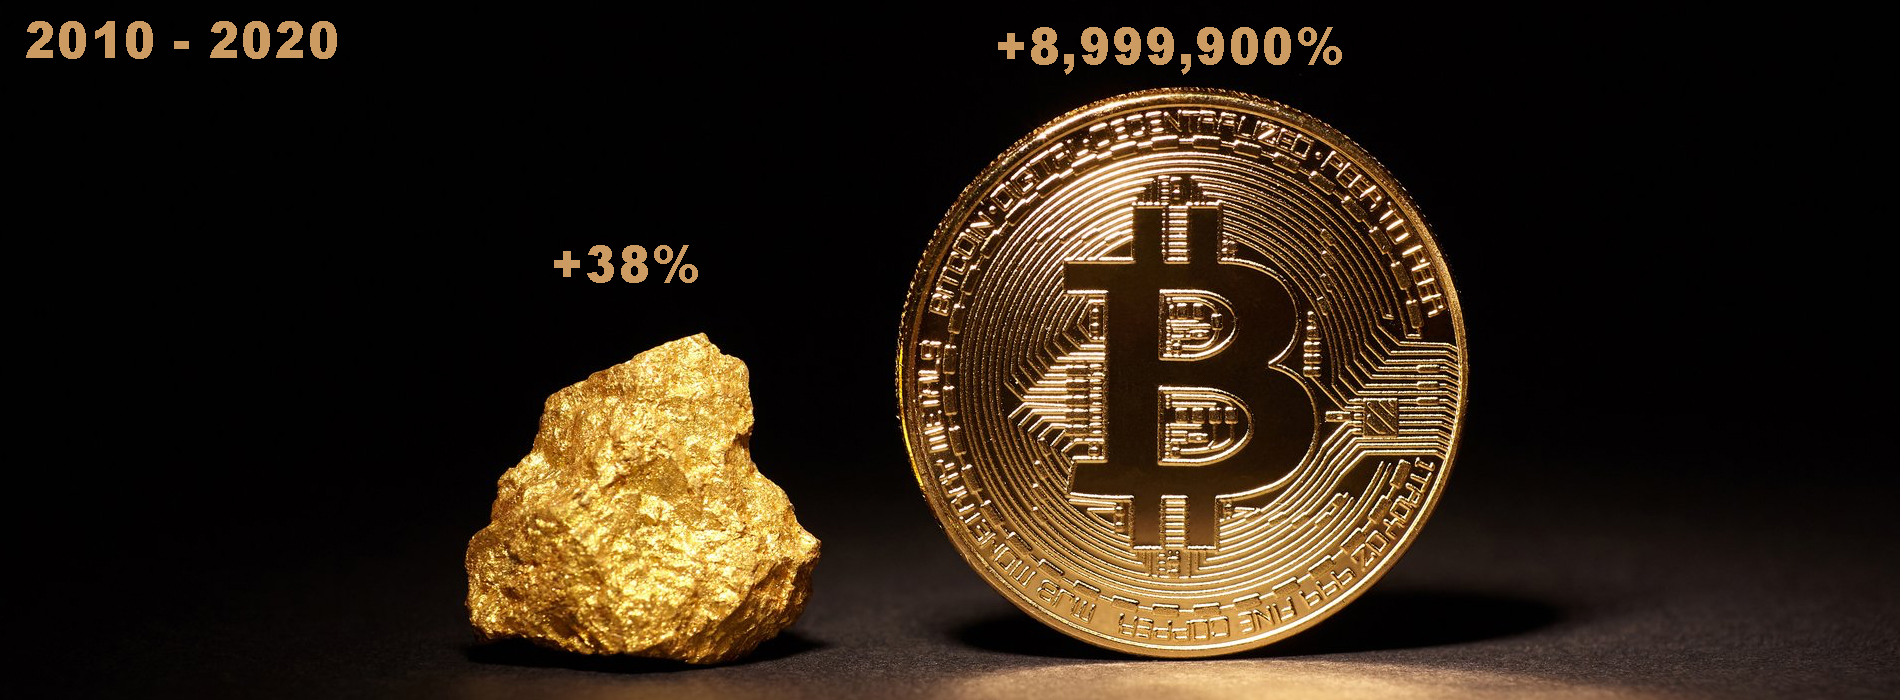 Bitcoin Gained 8.9 Million Percent Over the Last Decade